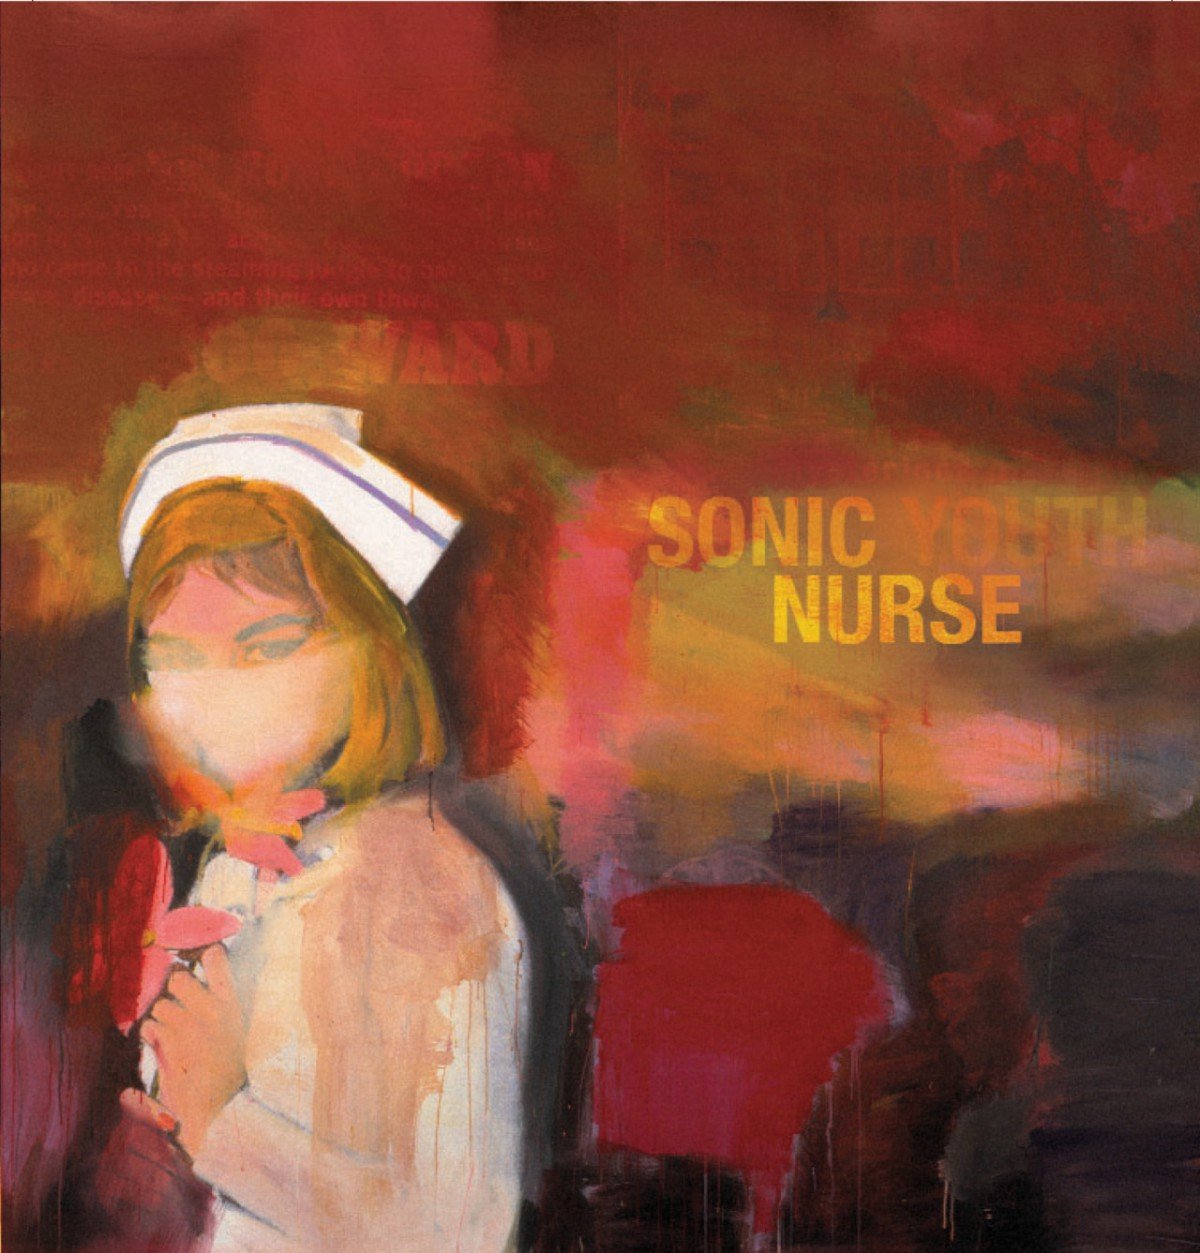 Sonic Youth's "Sonic Nurse" with cover art by Richard Prince